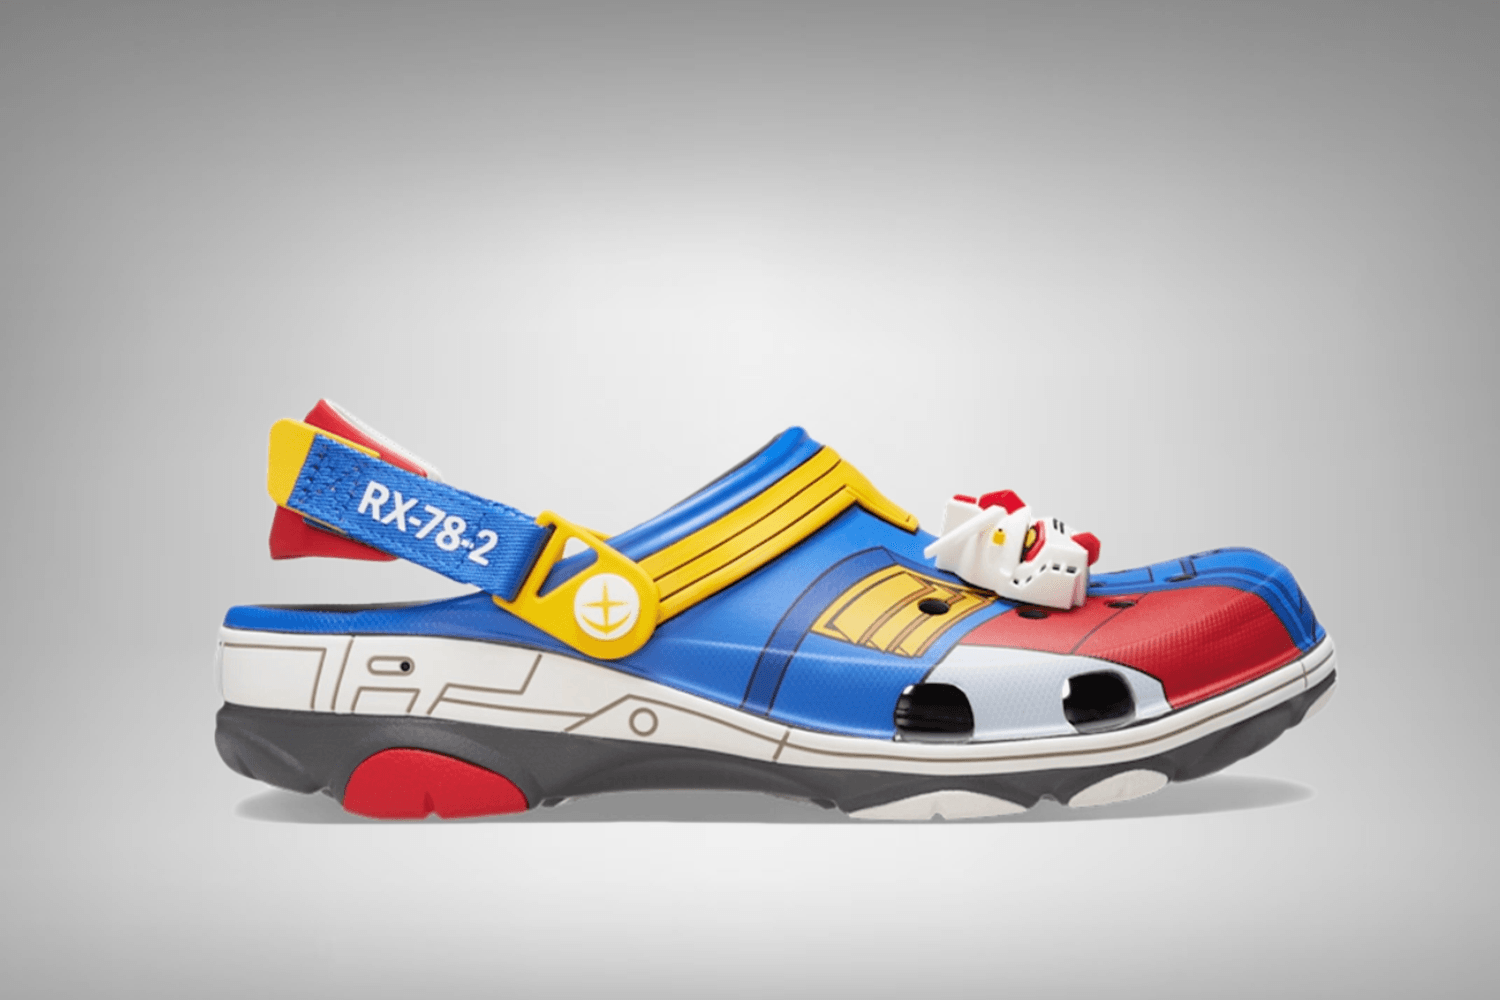 Out now: Gundam celebrates 45th anniversary with Crocs release